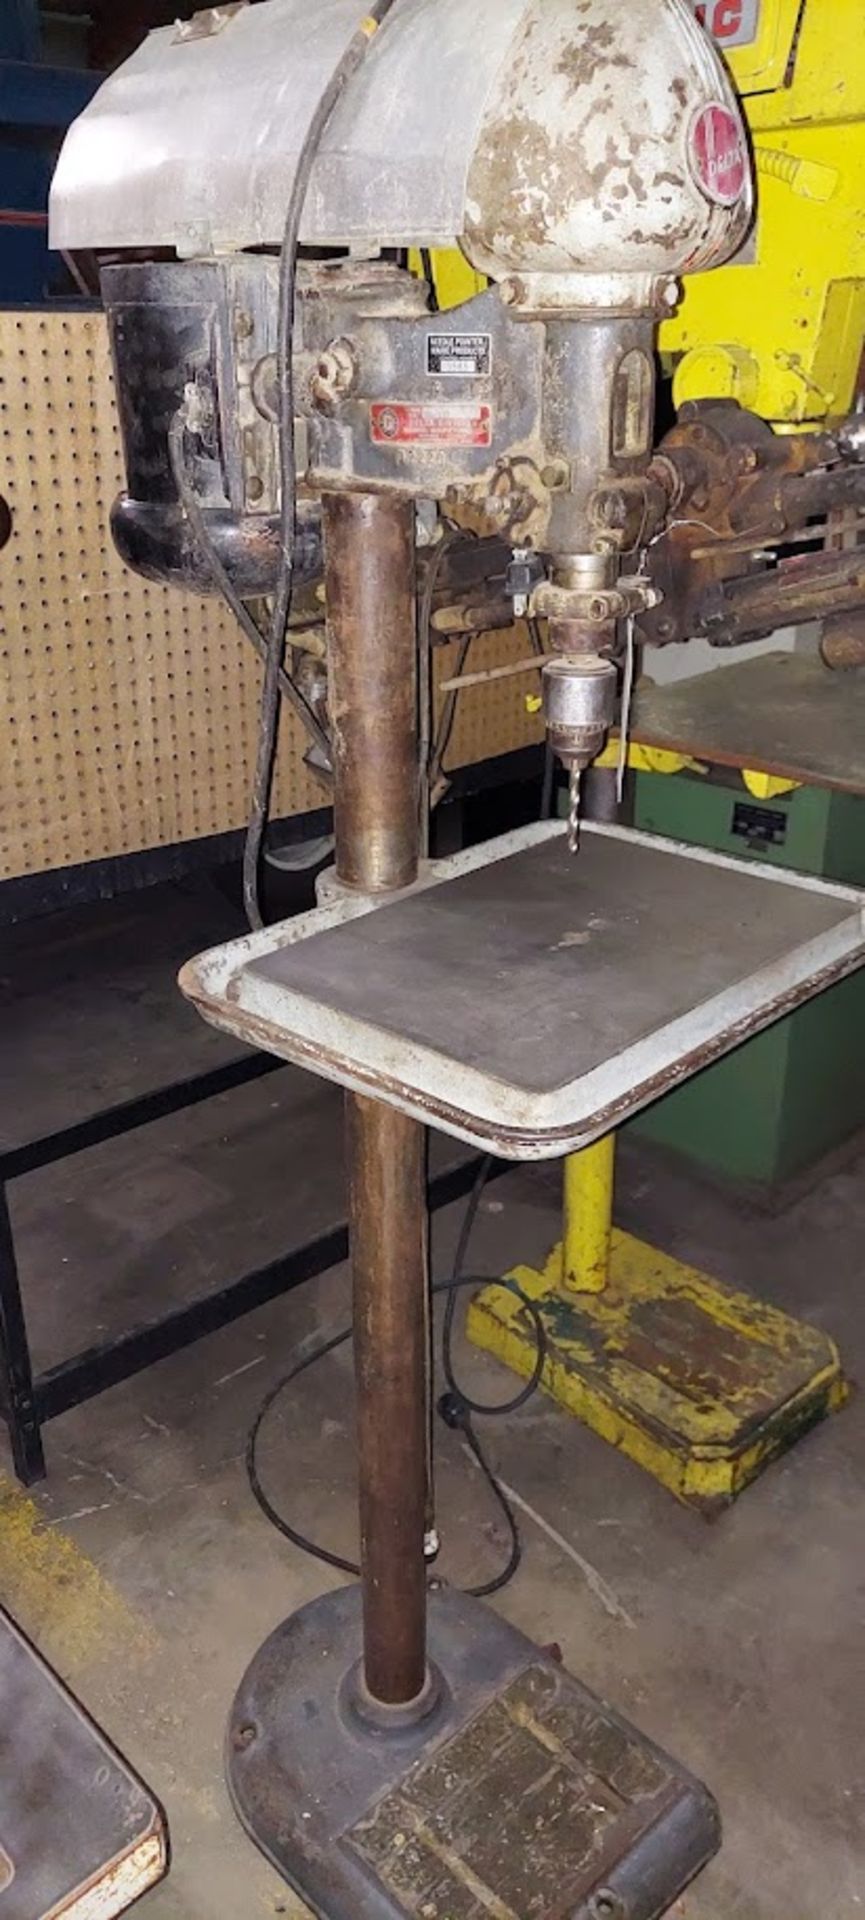 Delta 14" Drill Press, Model #61-7572, Variable Speed Step Pulley, Motor is 1/4 HP 115/230 Volts - Image 2 of 2